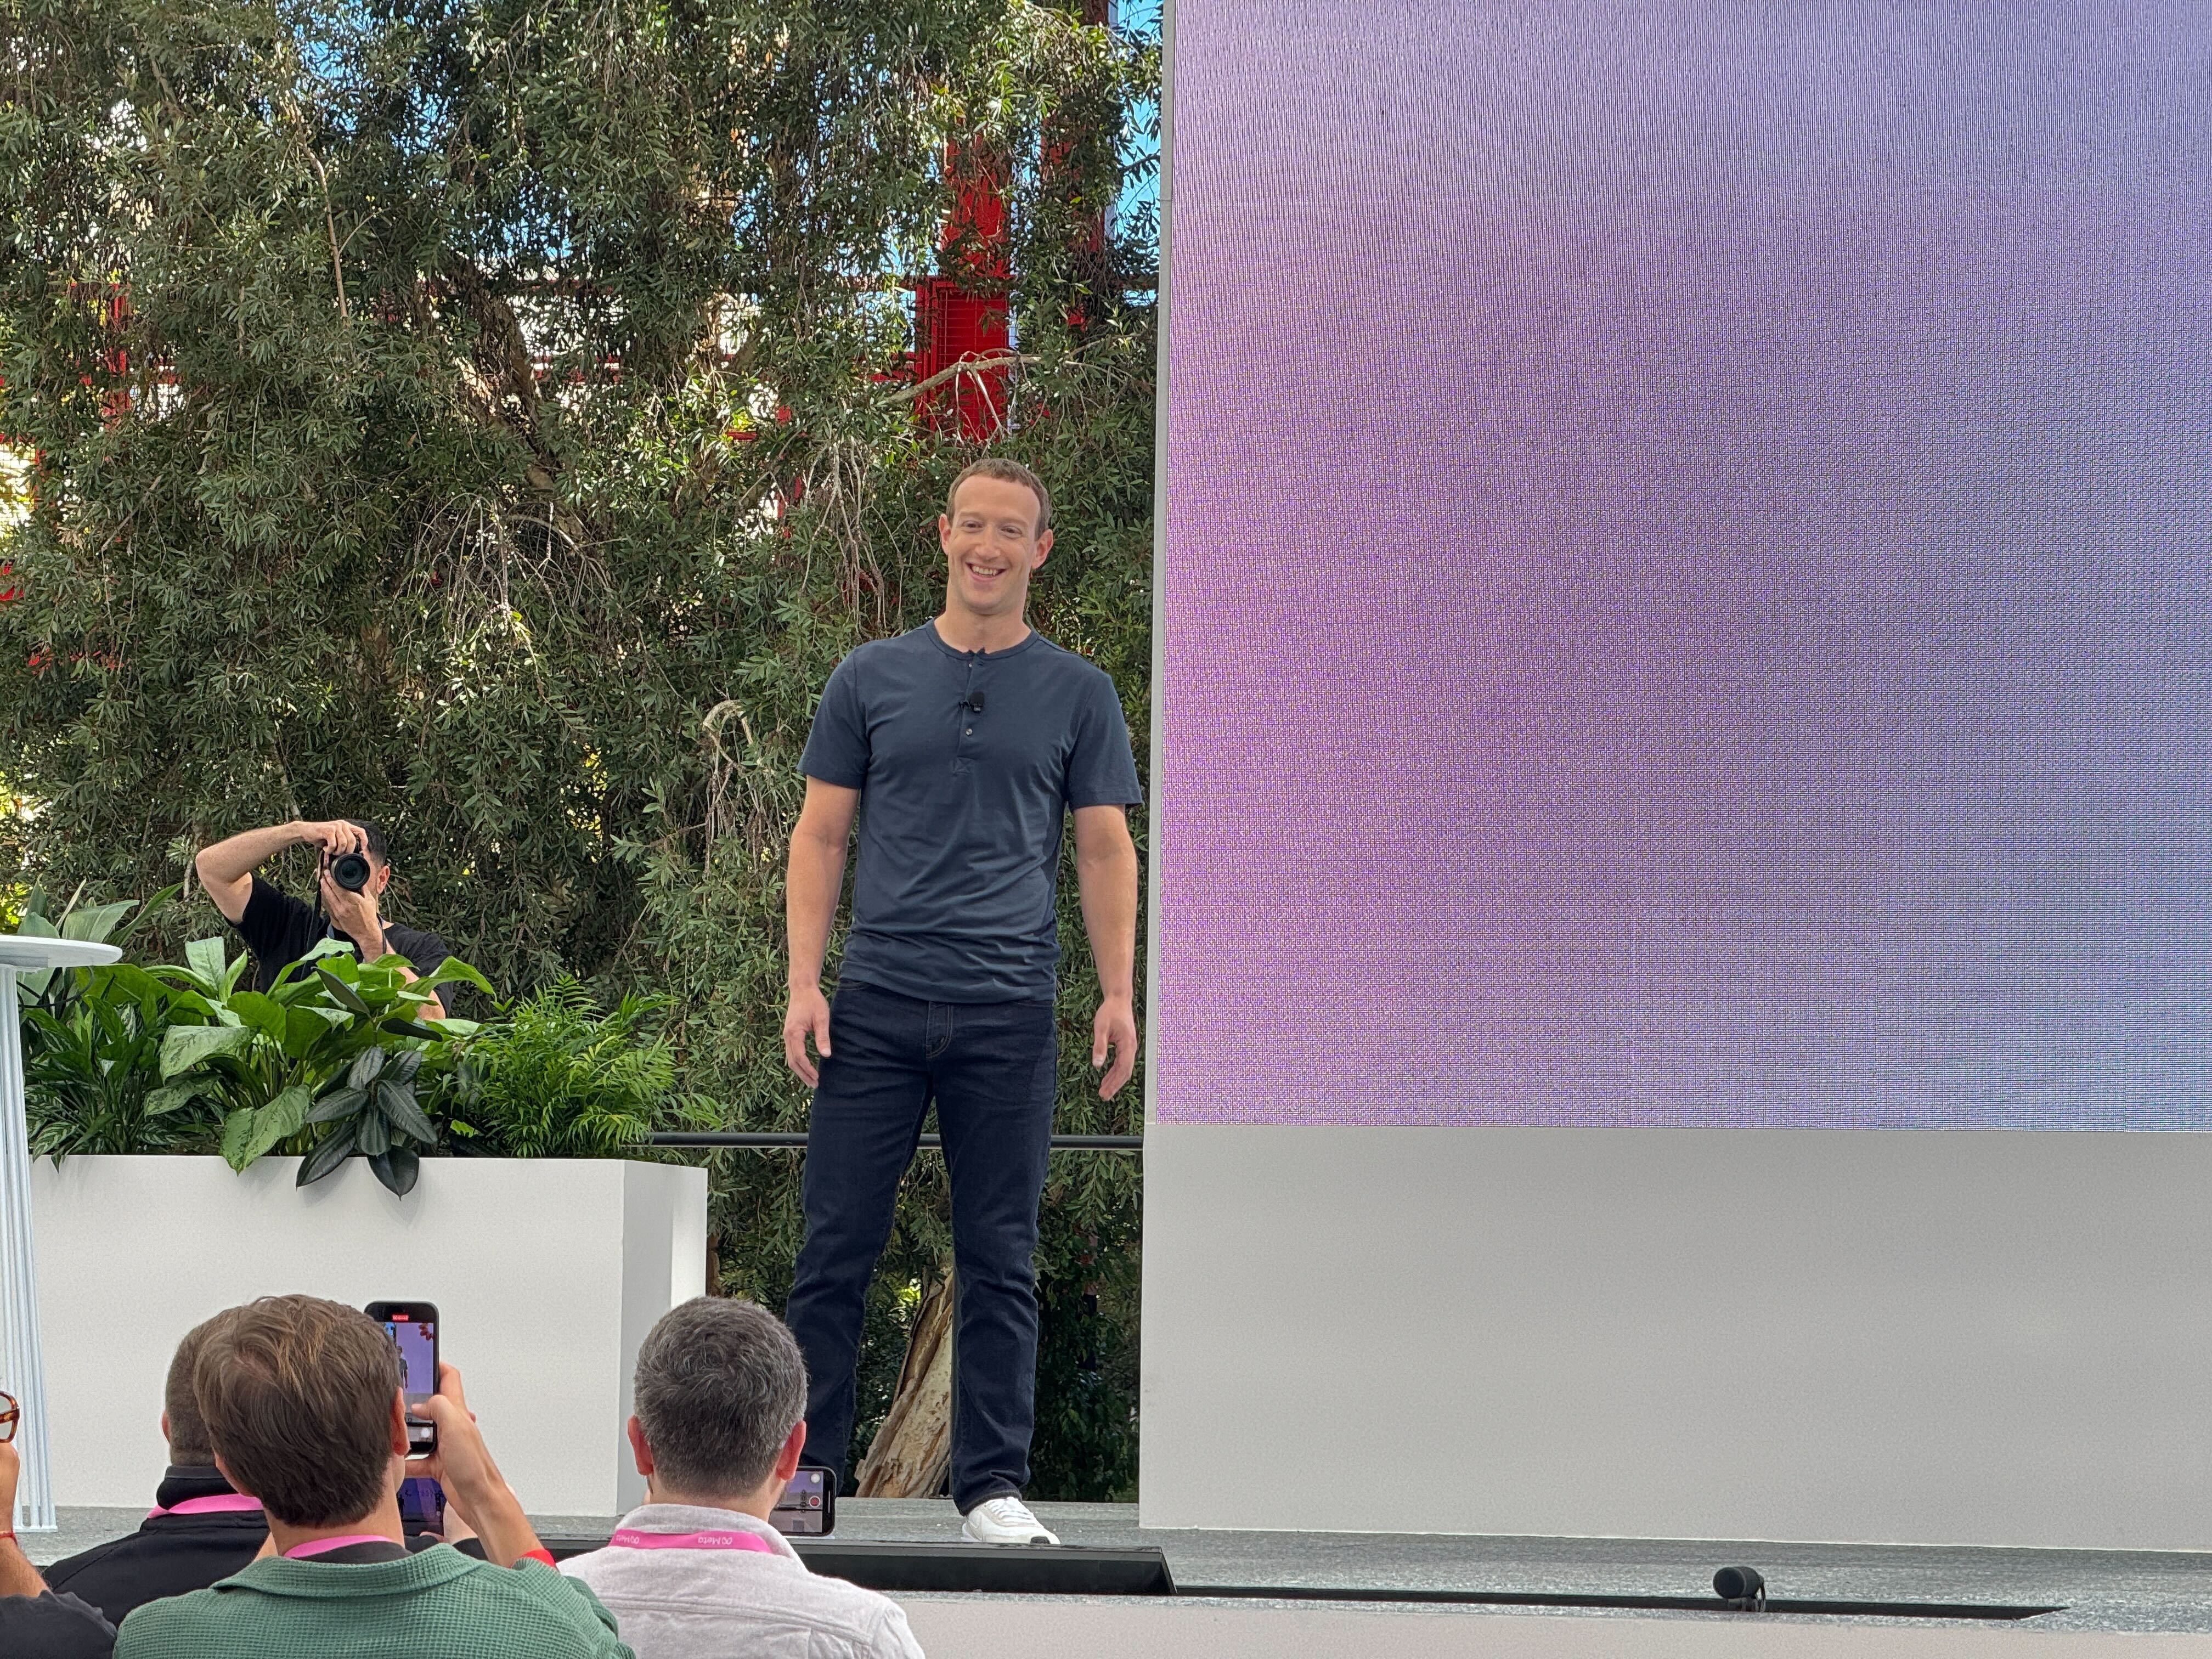 Mark Zuckerberg on stage at Meta Connect 2023